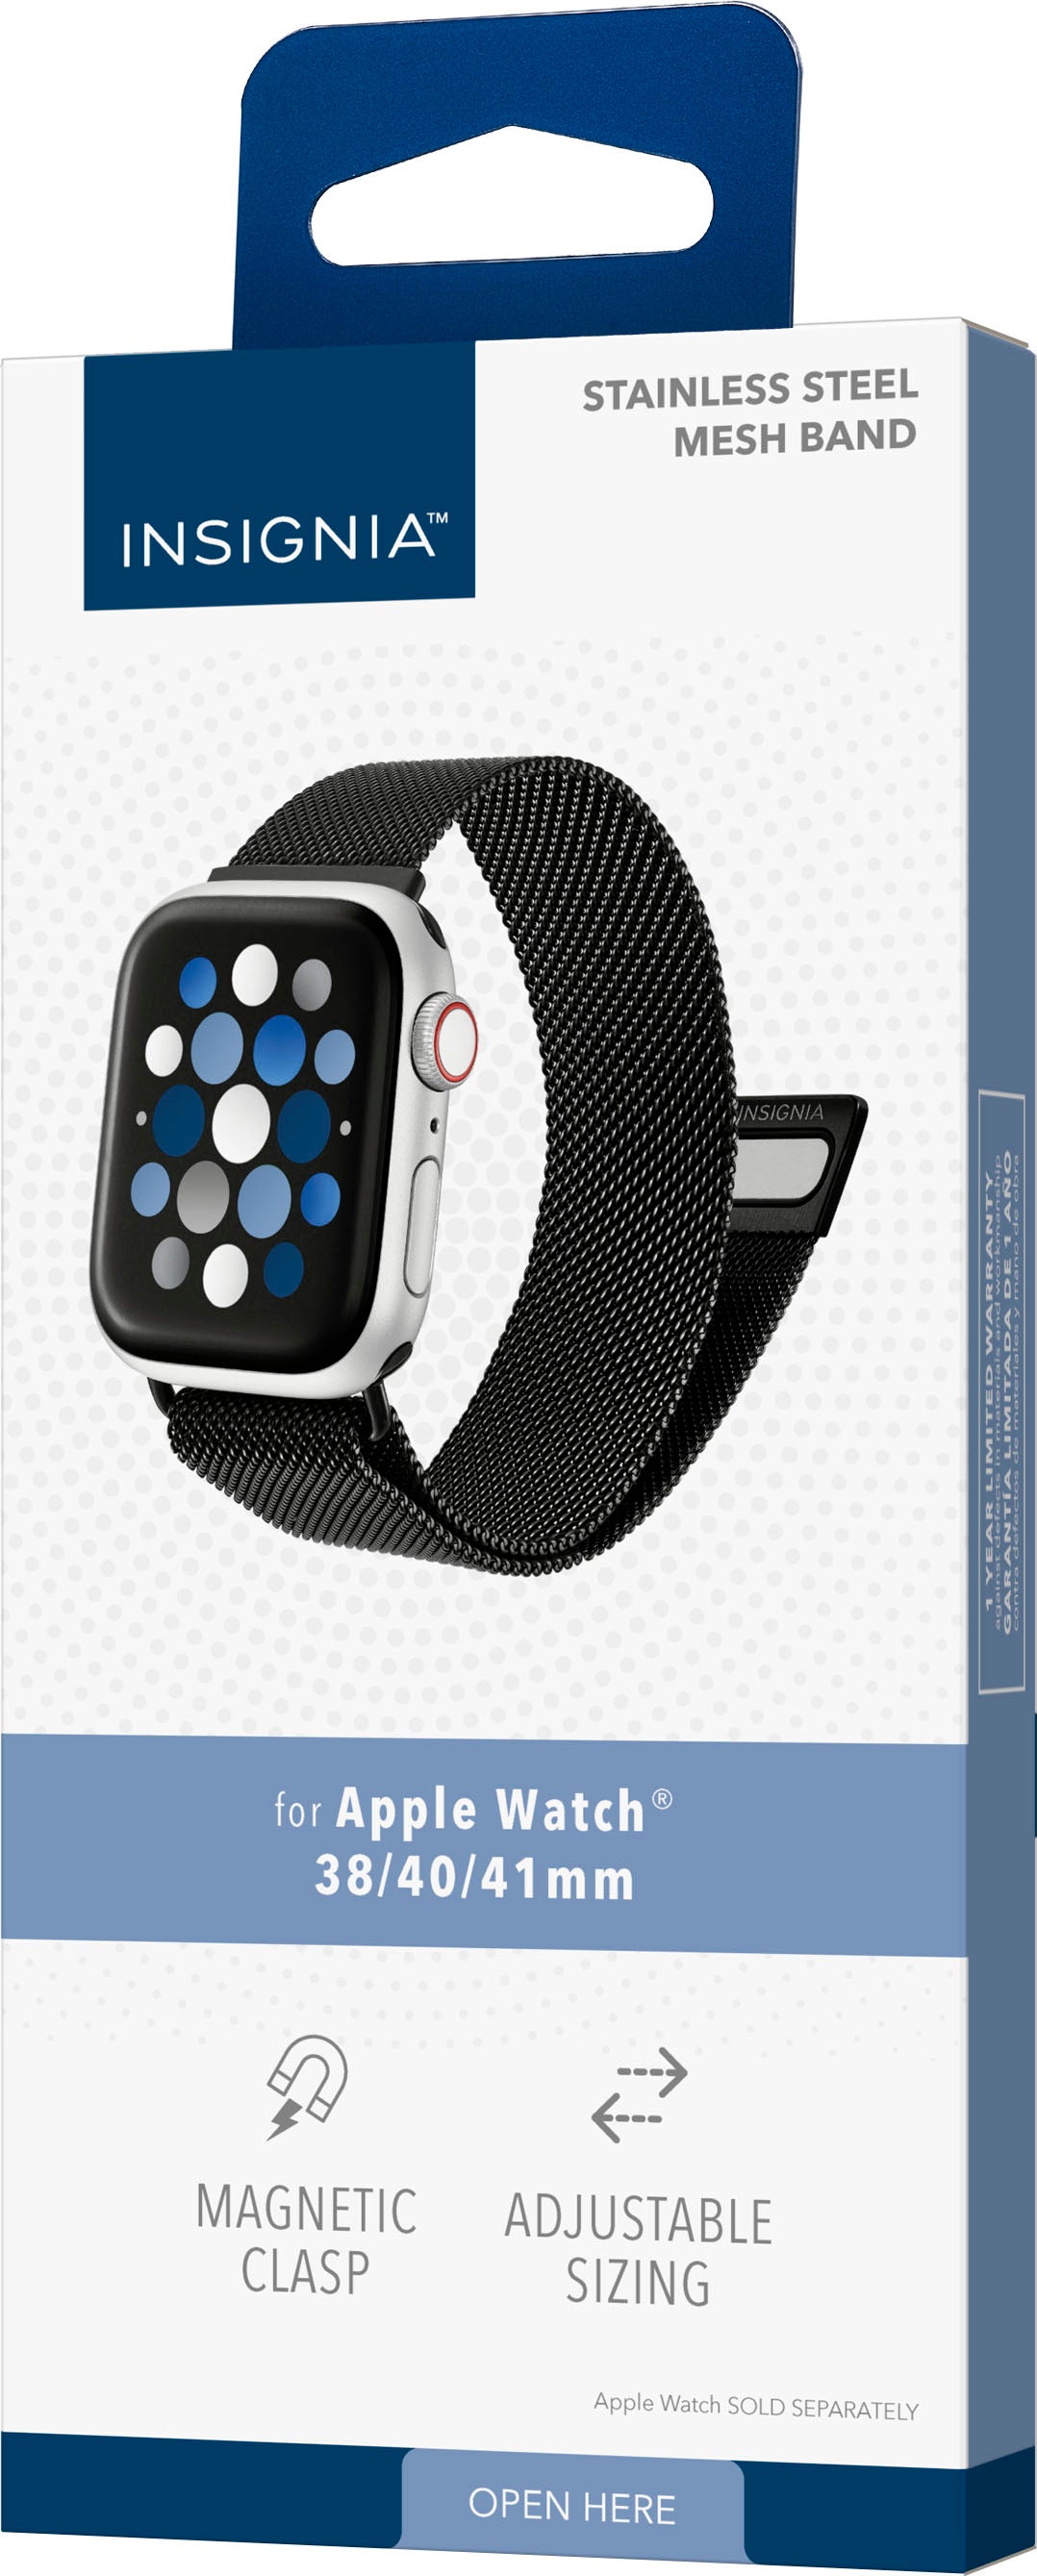 Insignia™ - Stainless Steel Mesh Band for Apple Watch 38mm, 40mm, 41mm and SE - Black_7